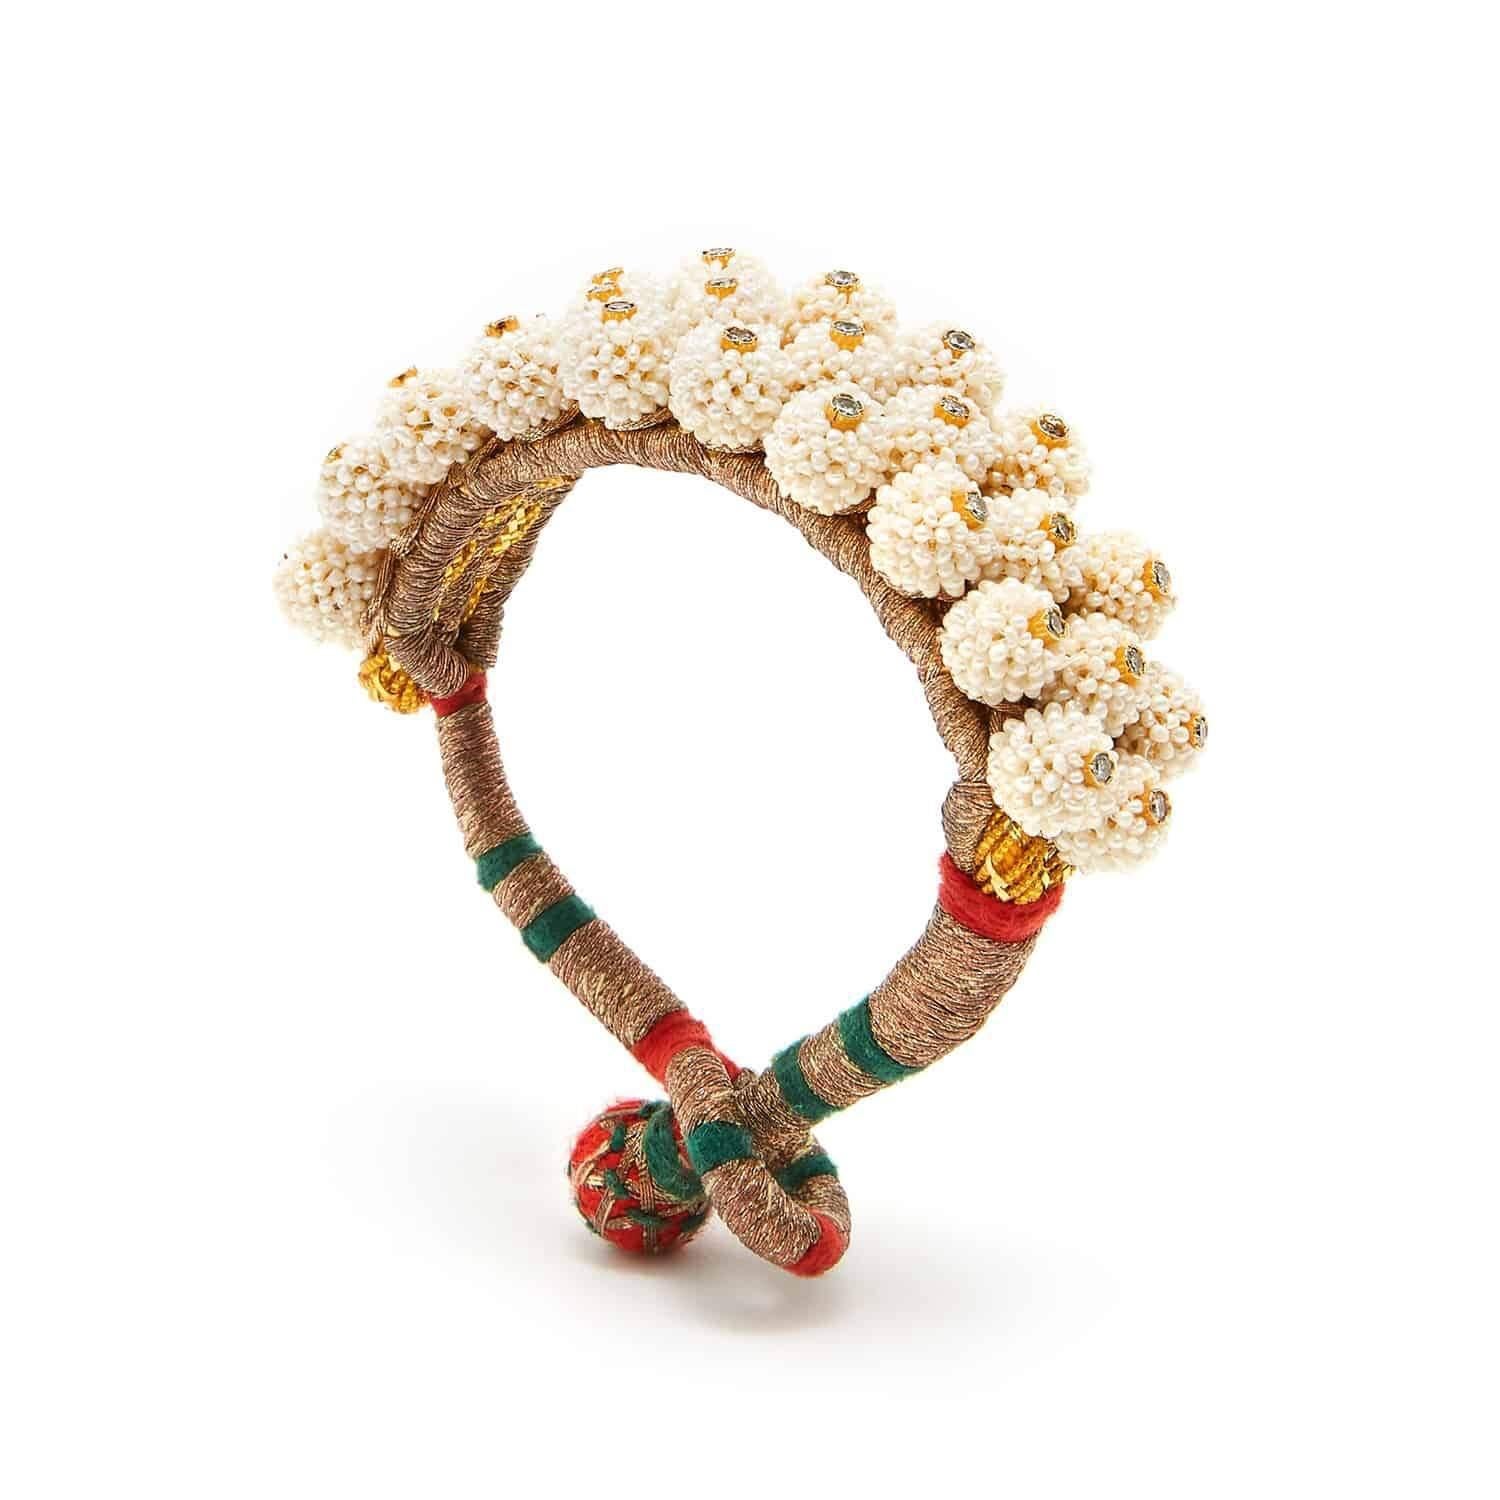 The Maharani Pearl Cuff is inspired by a pair of pearl cuffs owned by the Maharani of Balunda. A hand stitched tightly woven silk cuff studded with tiny pearls highlighted by tiny twinkling white topaz.

- Size 7 with a silk bobble closure

From the